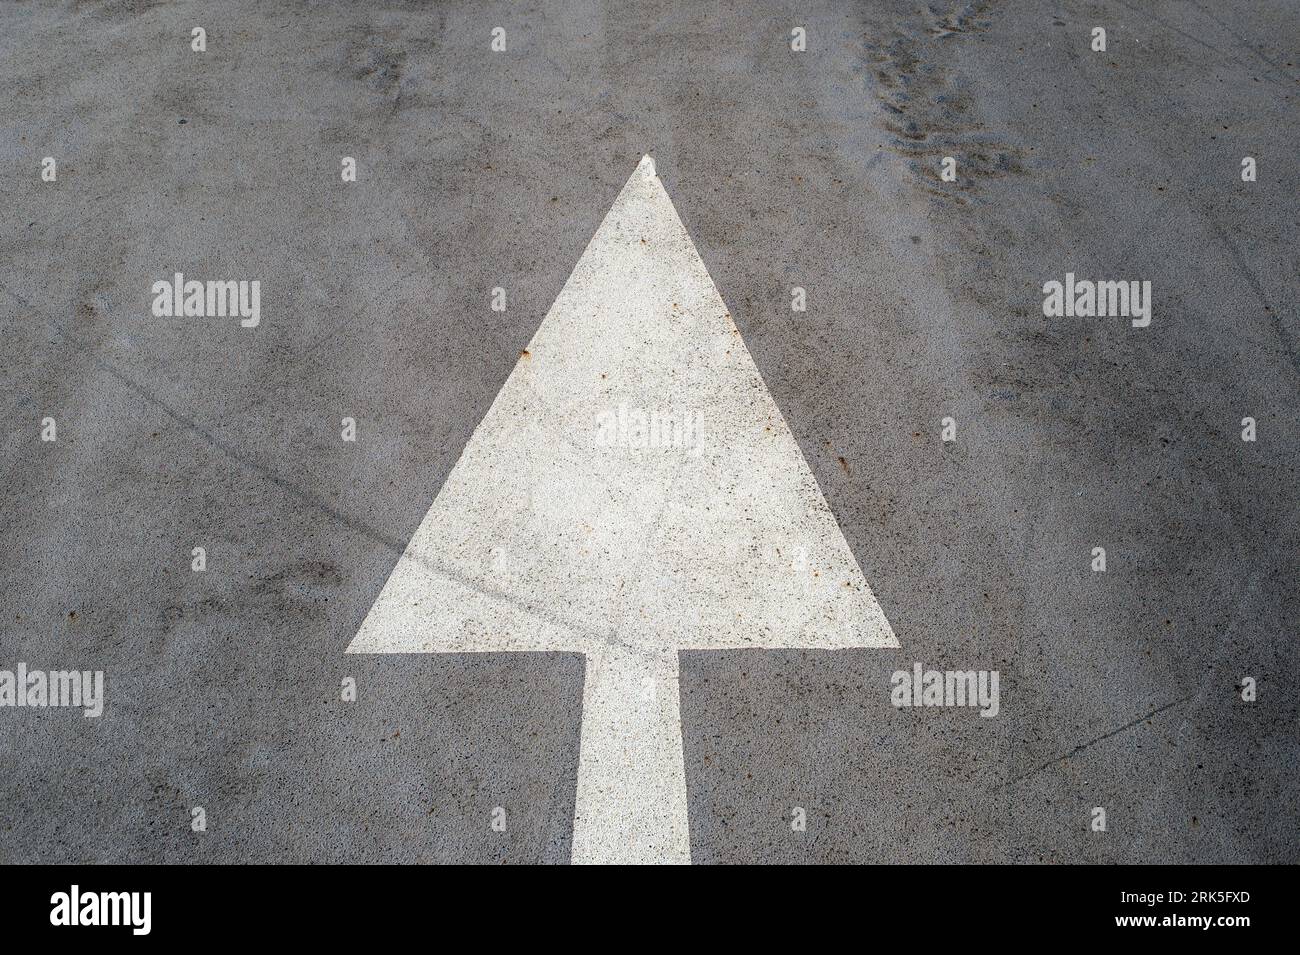 White painted arrow on a road suface, straight ahead. Stock Photo